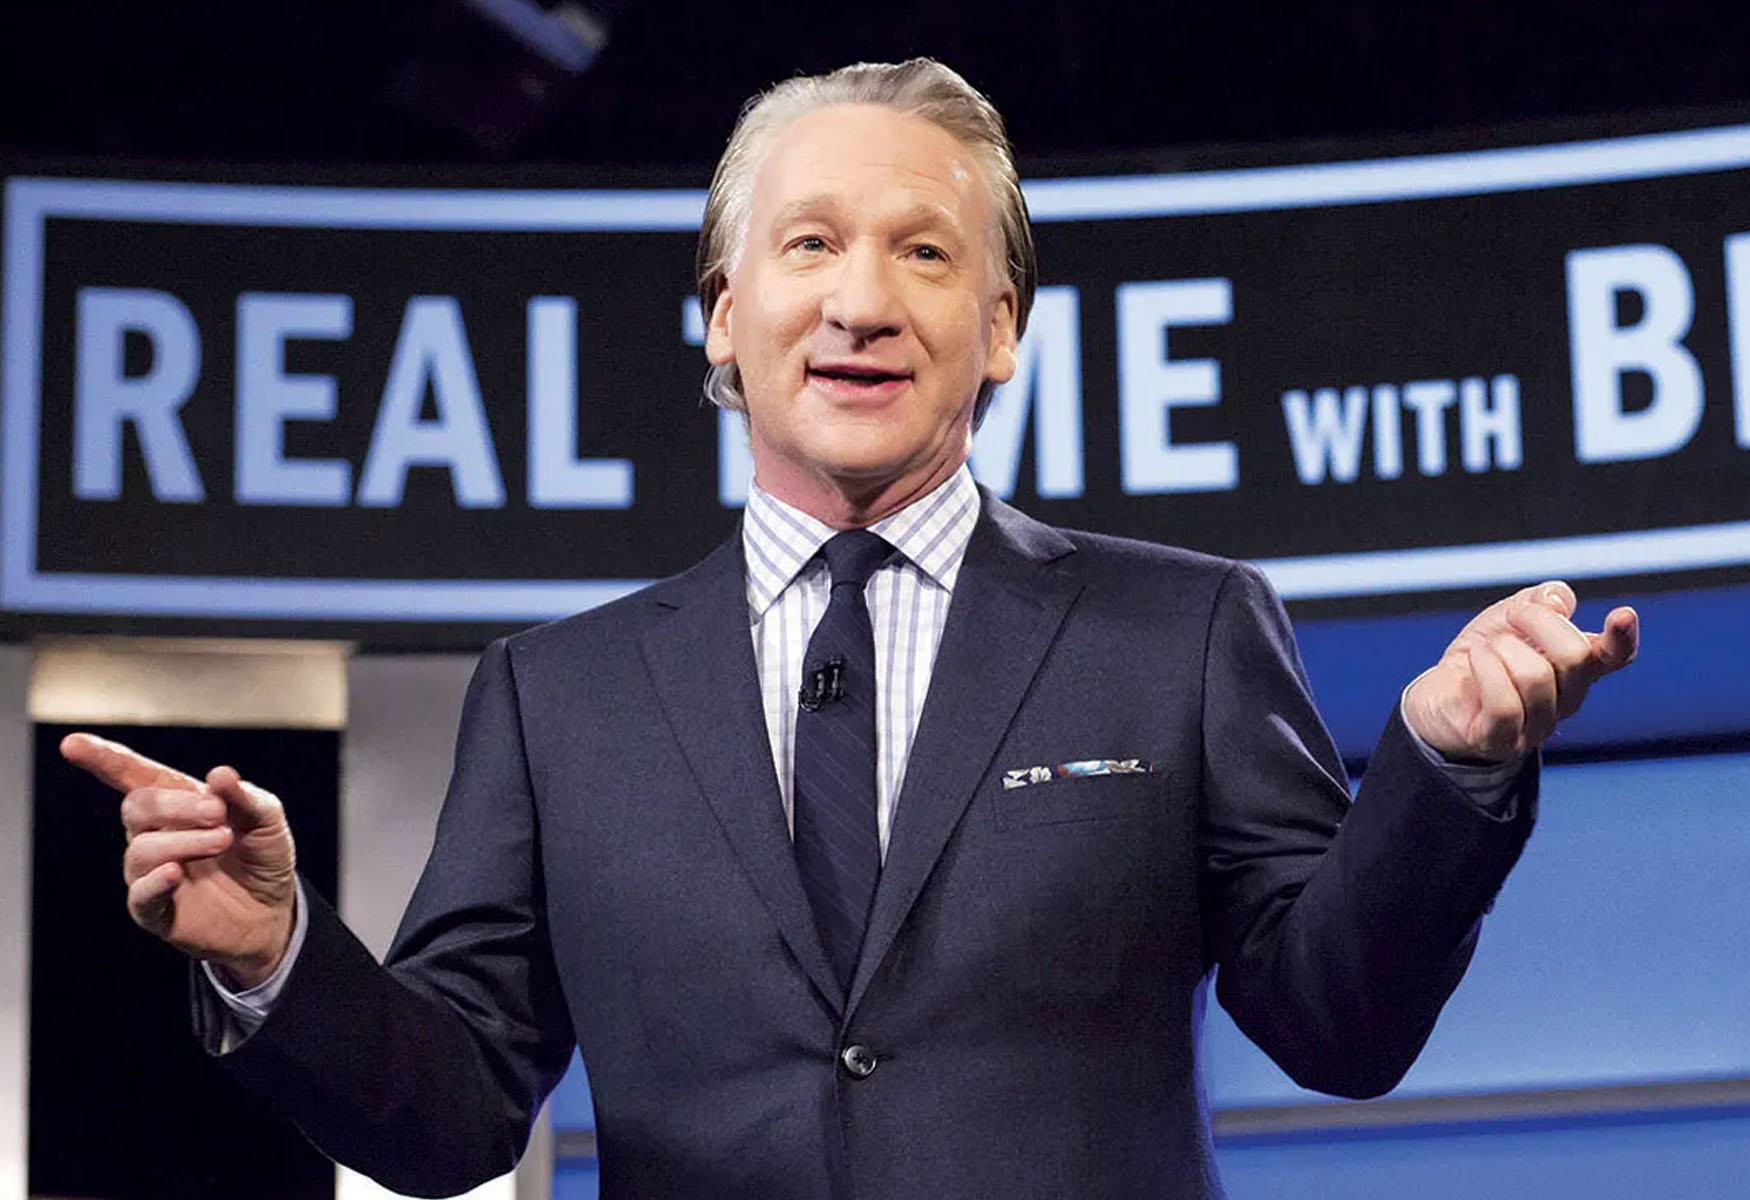 bill-maher-warns-against-the-rise-of-christian-nationalism-urges-respect-for-separation-of-church-and-state